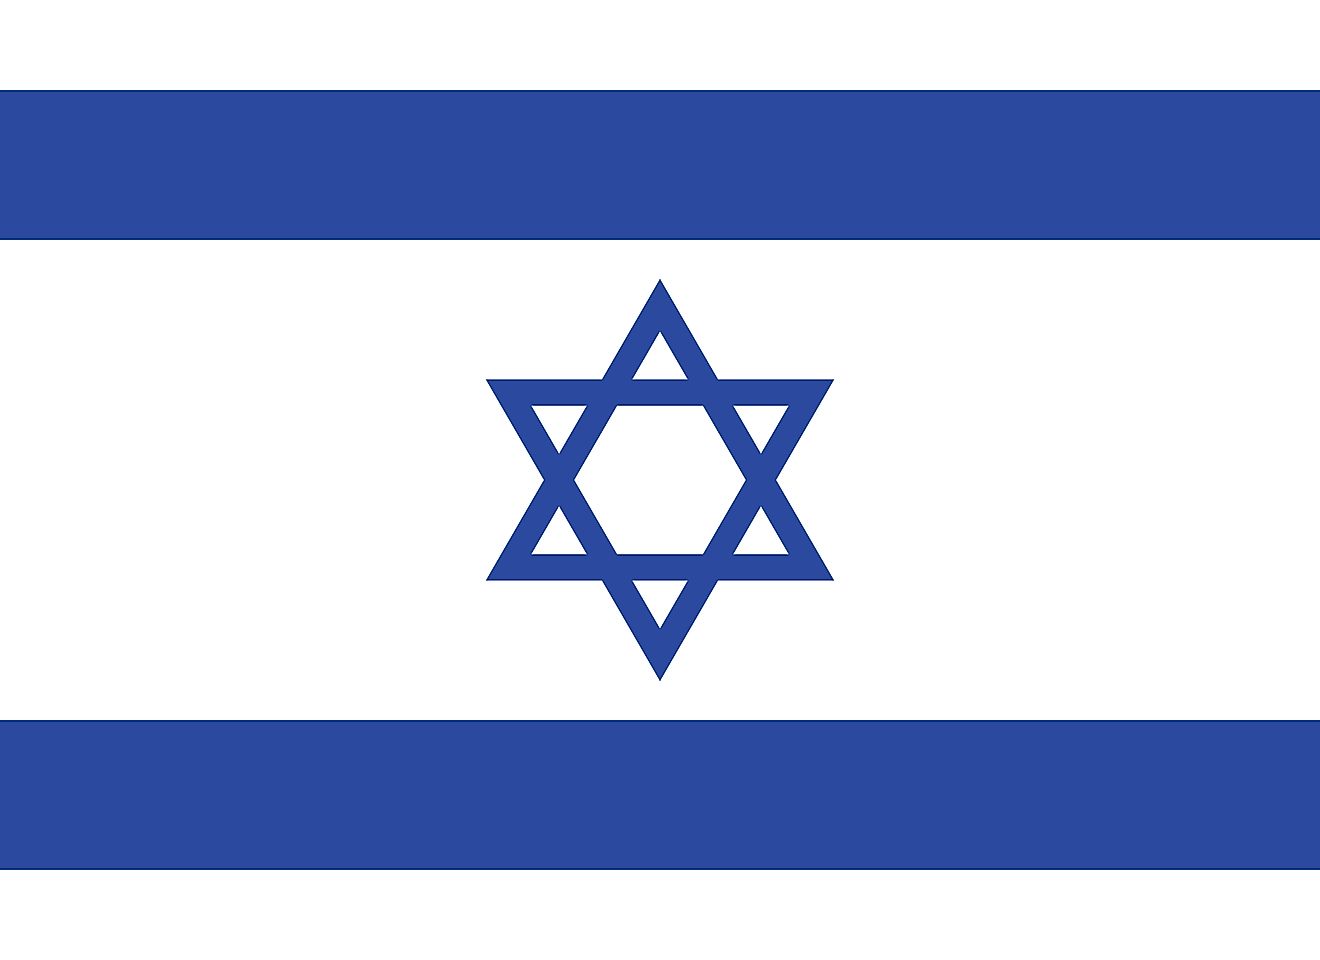 The flag of Israel  consists of white band with a blue hexagram centered between two equal horizontal blue bands